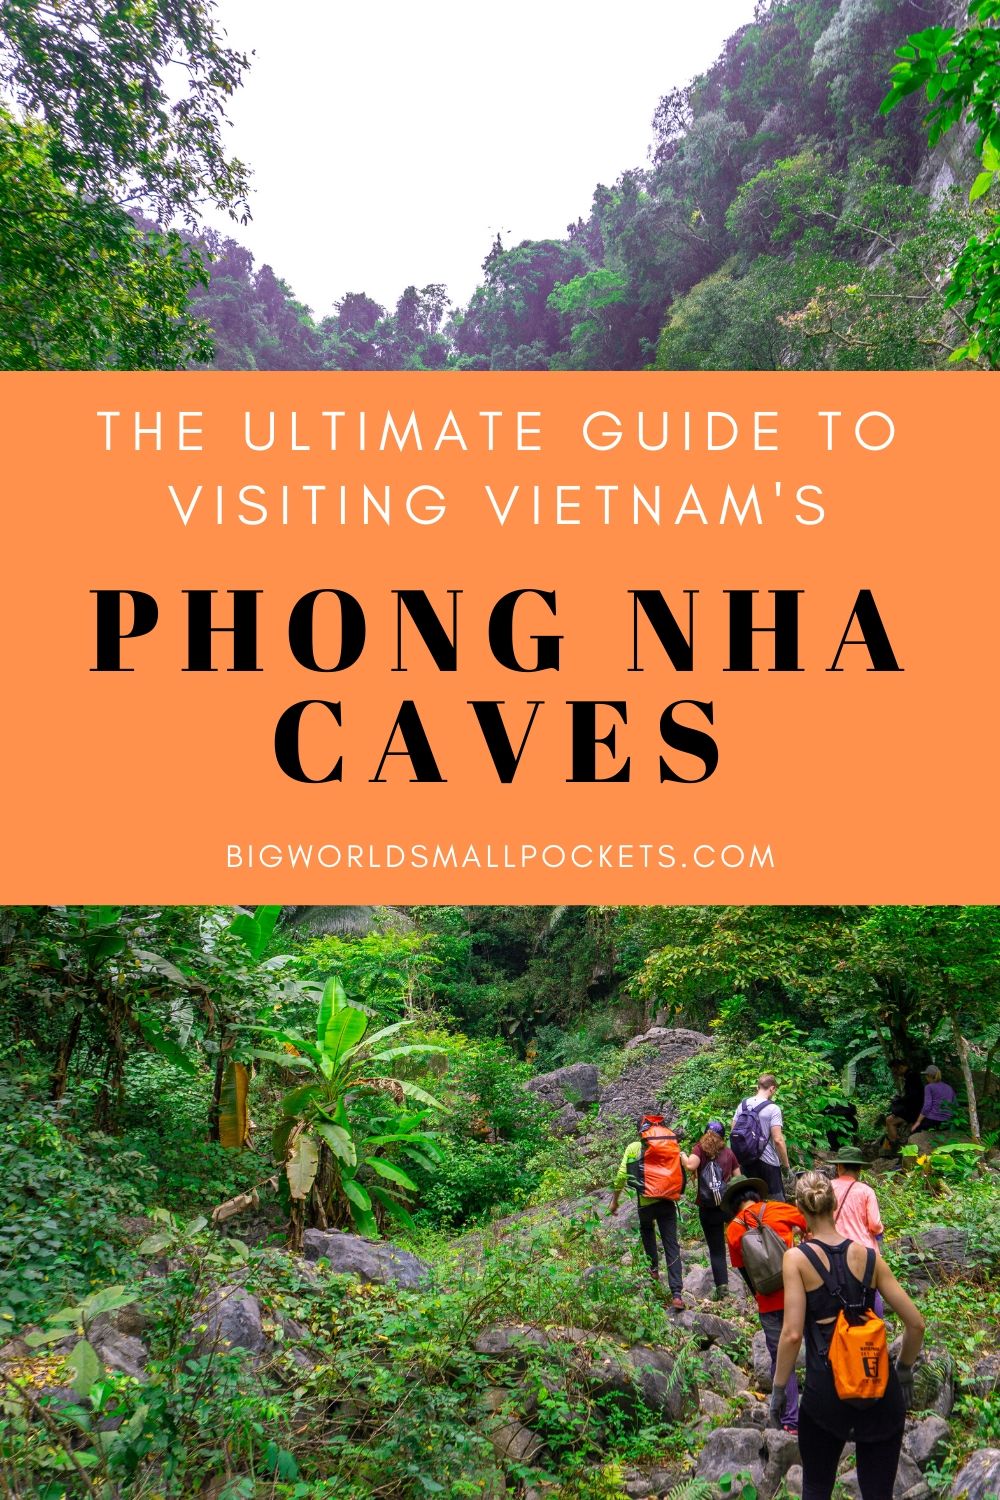 The Ultimate Guide to Visiting Vietnam's Phong Nha Caves